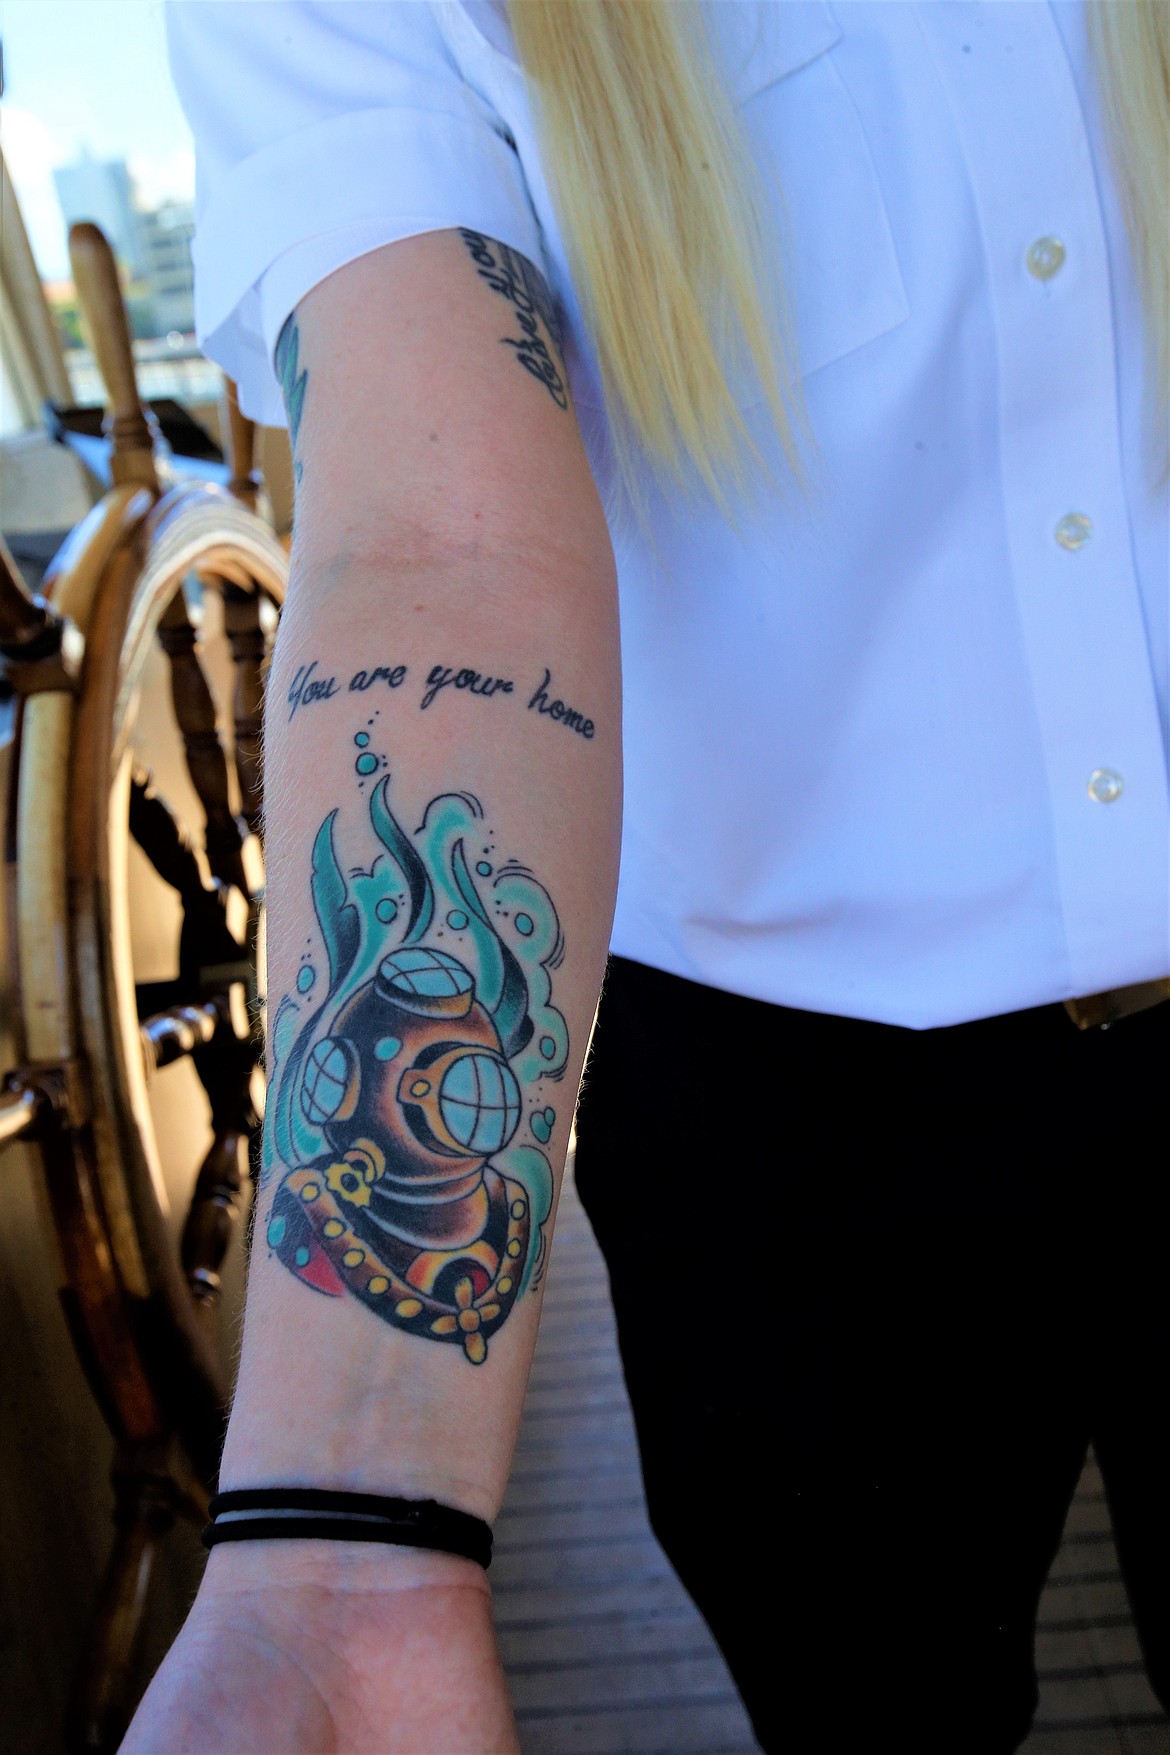 Capt. Jessie Demery's tattoo's show her love for being on the water.